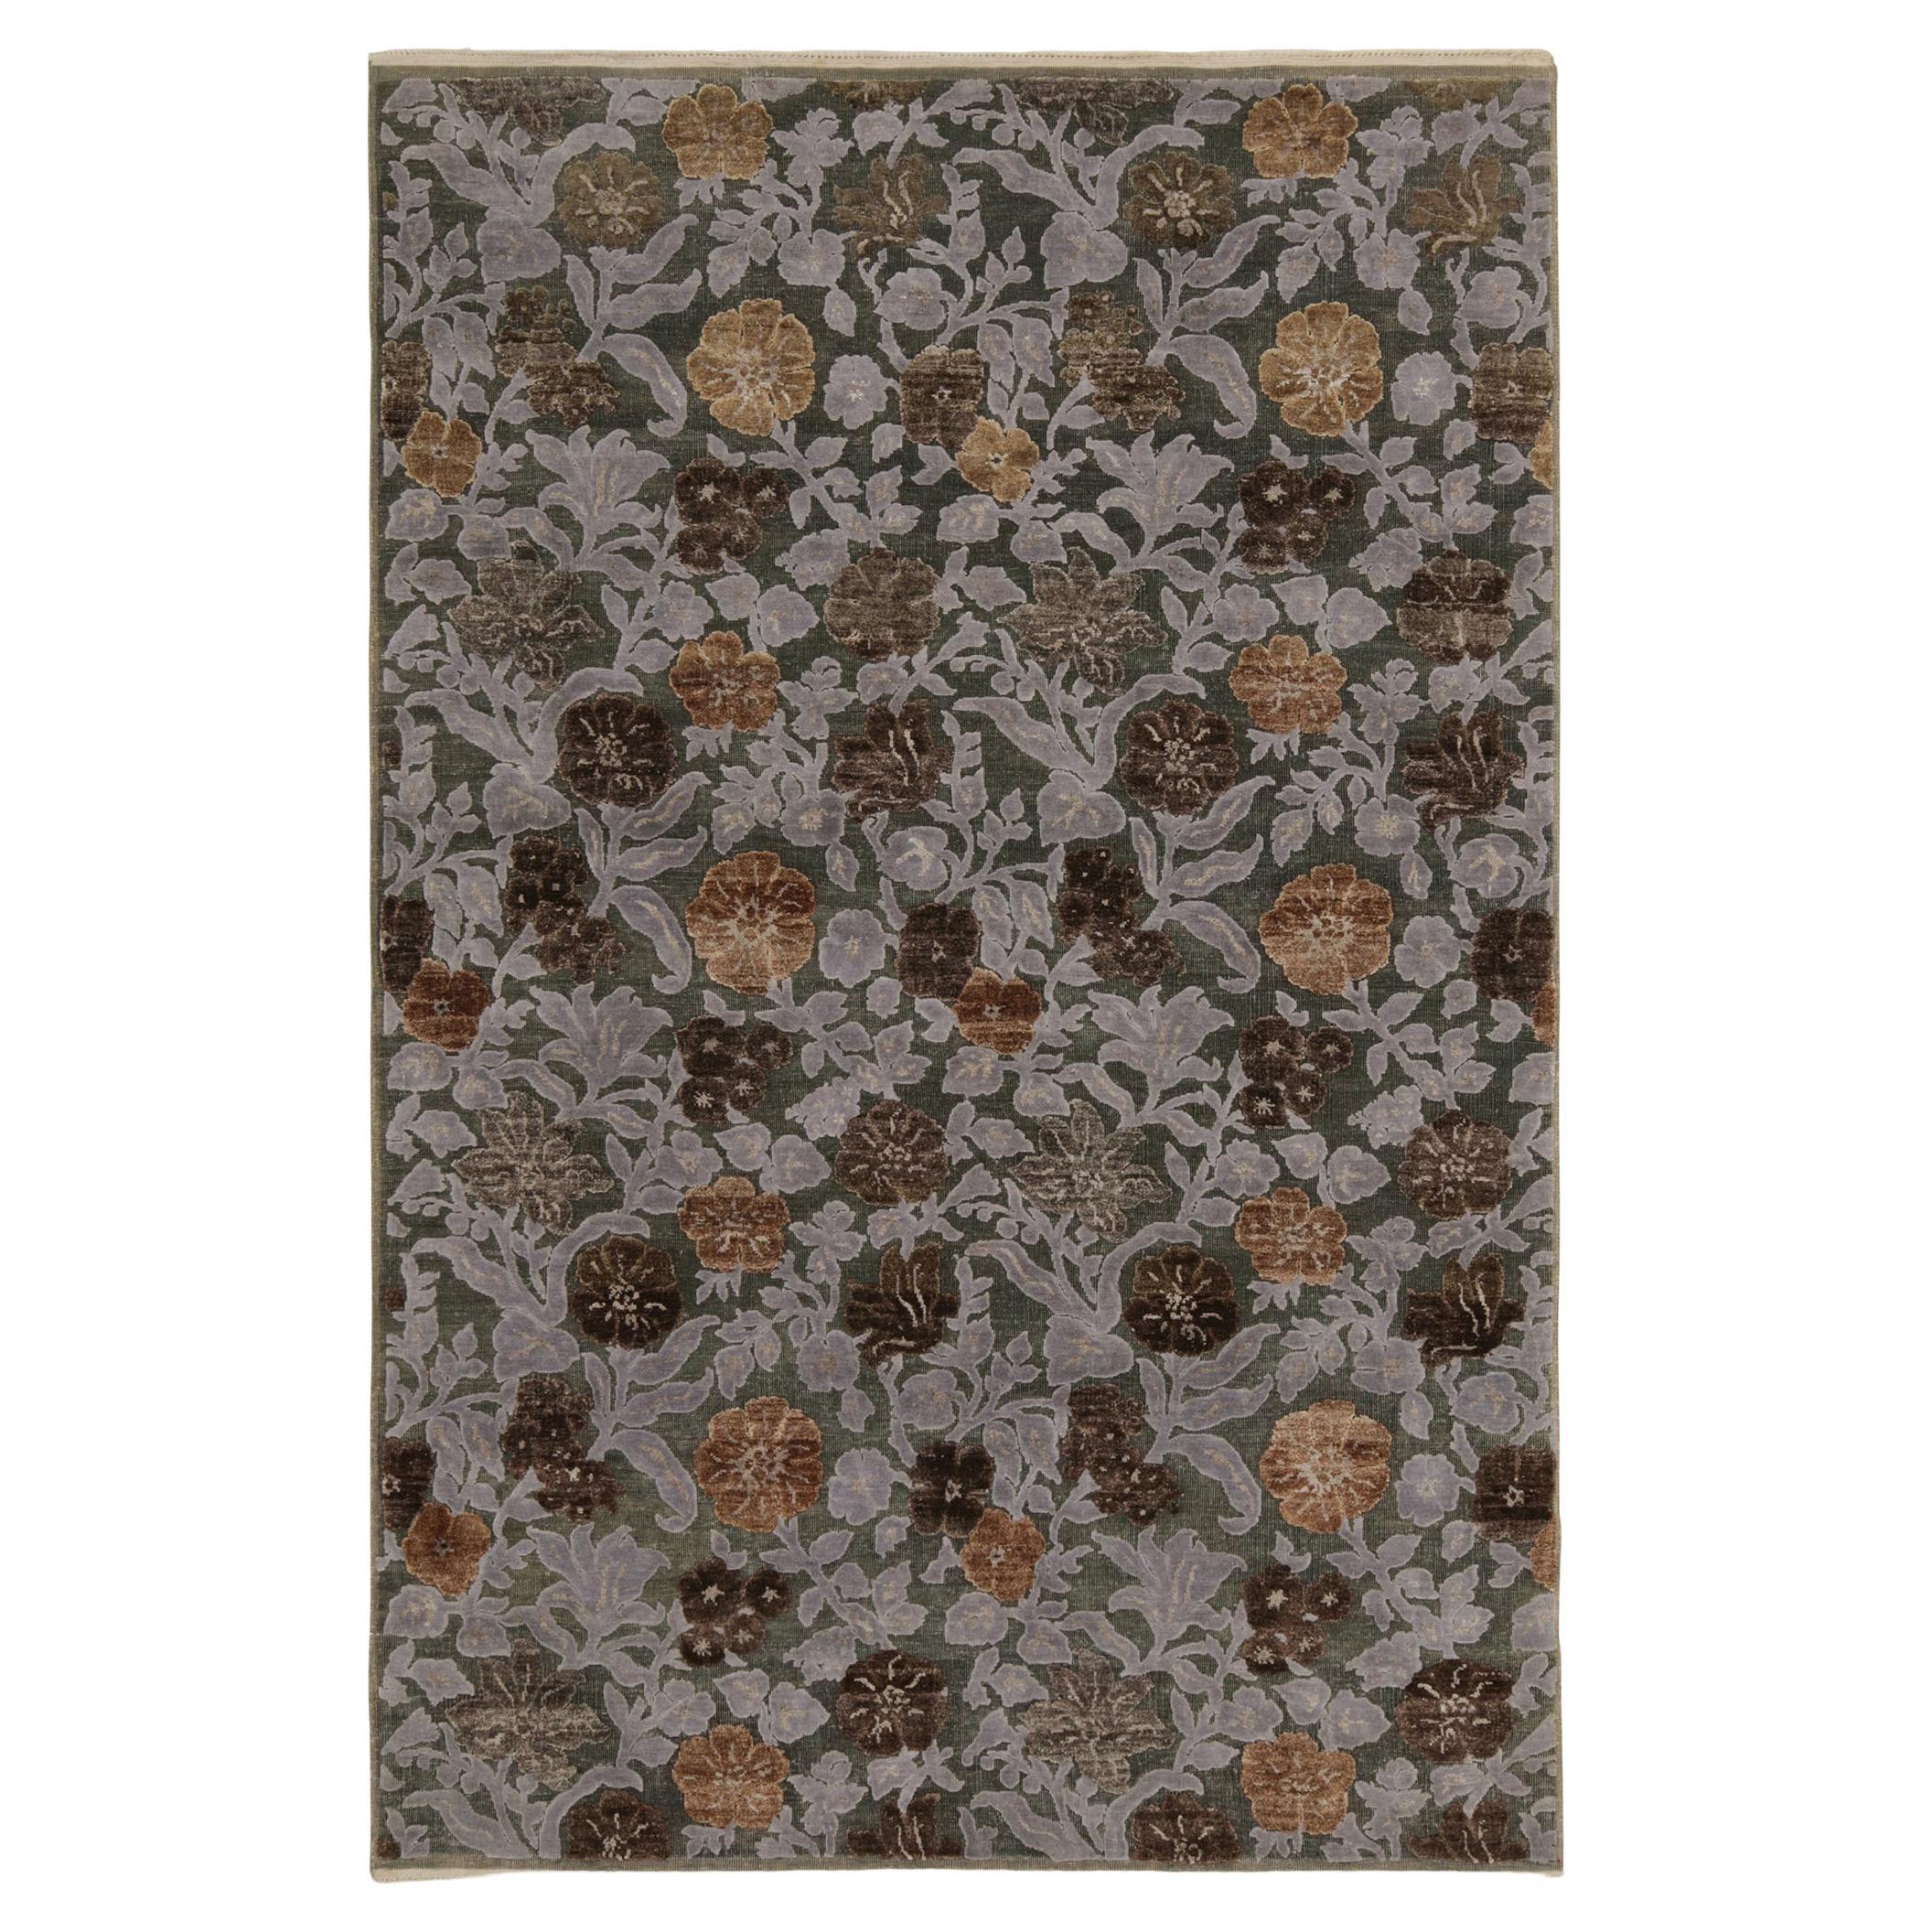 Rug & Kilim’s Contemporary rug in Beige-Brown and Gray-Blue Floral Patterns For Sale